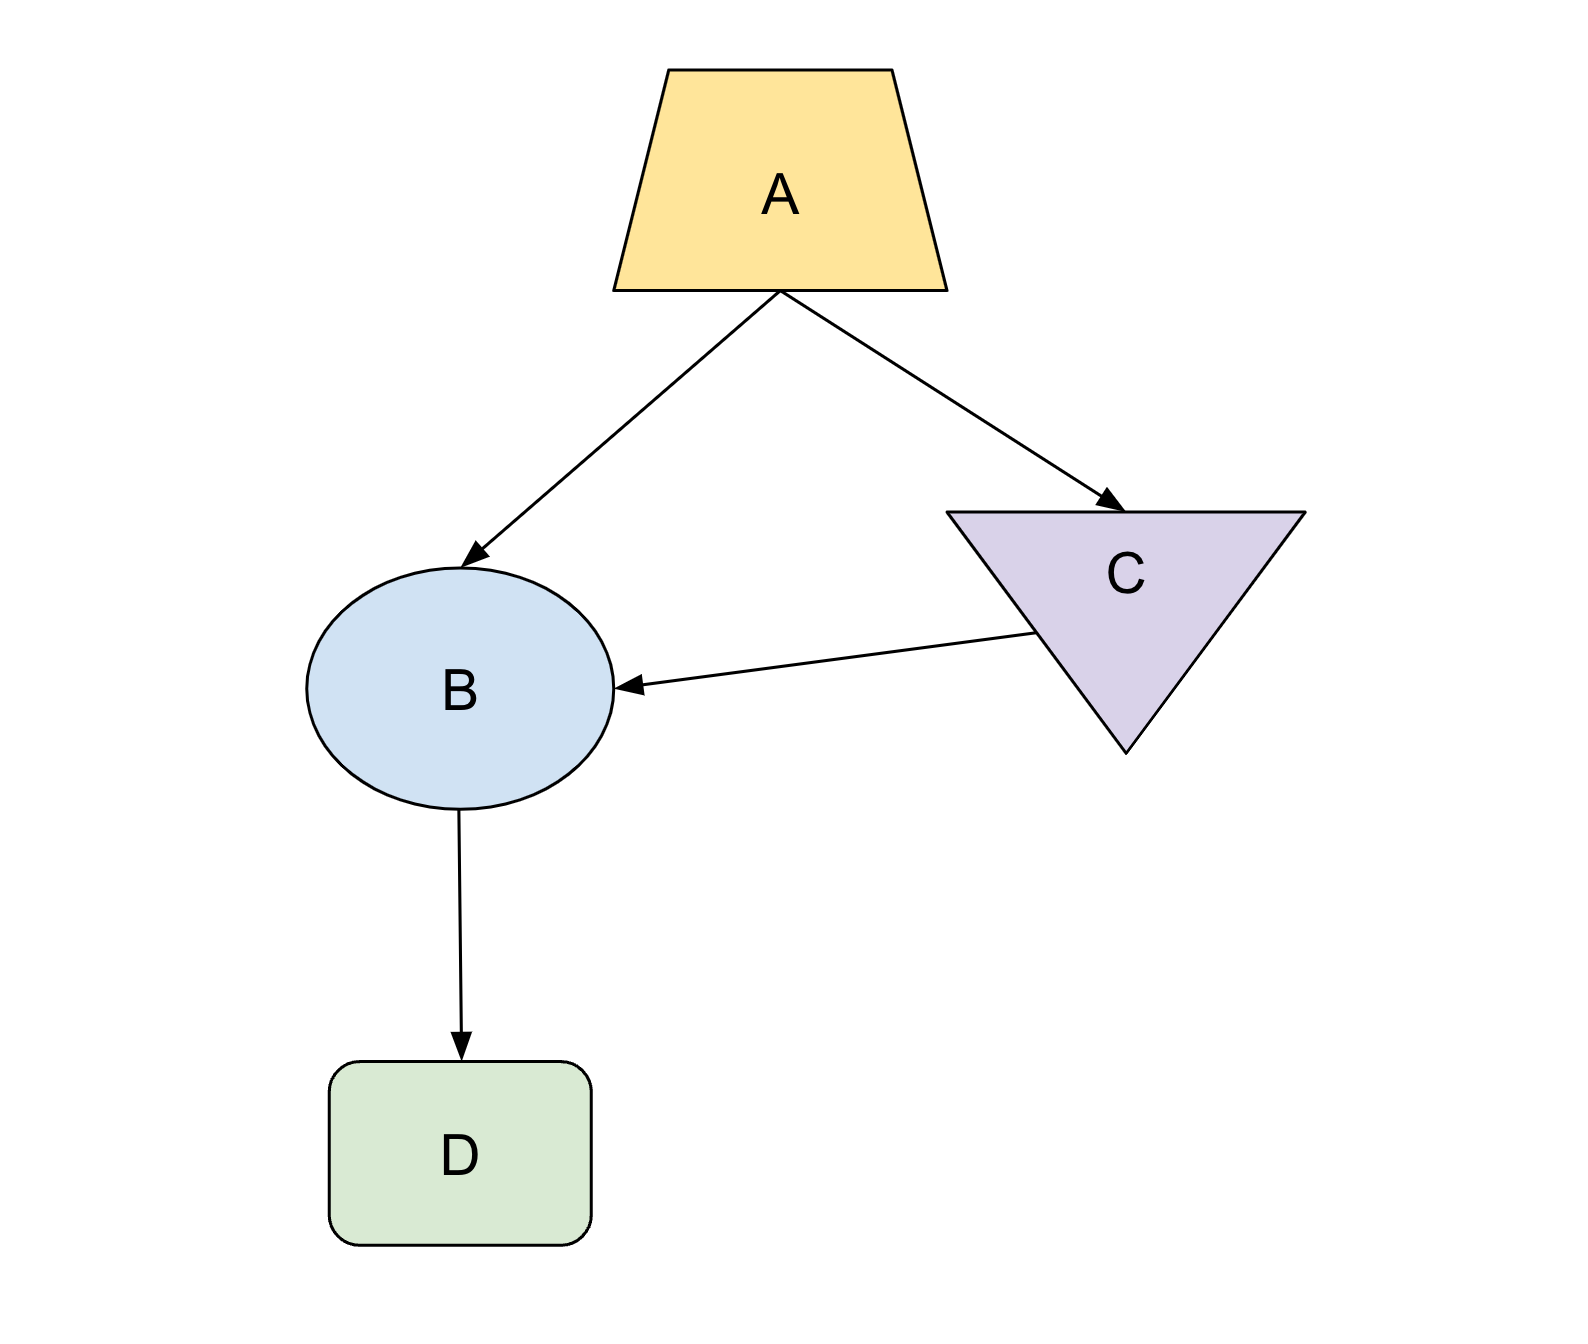 Sample diagram with a yellow
trapezoid labeled A, a blue circle labeled B, a purple triangle labeled C,
and a green rectangle labeled D.